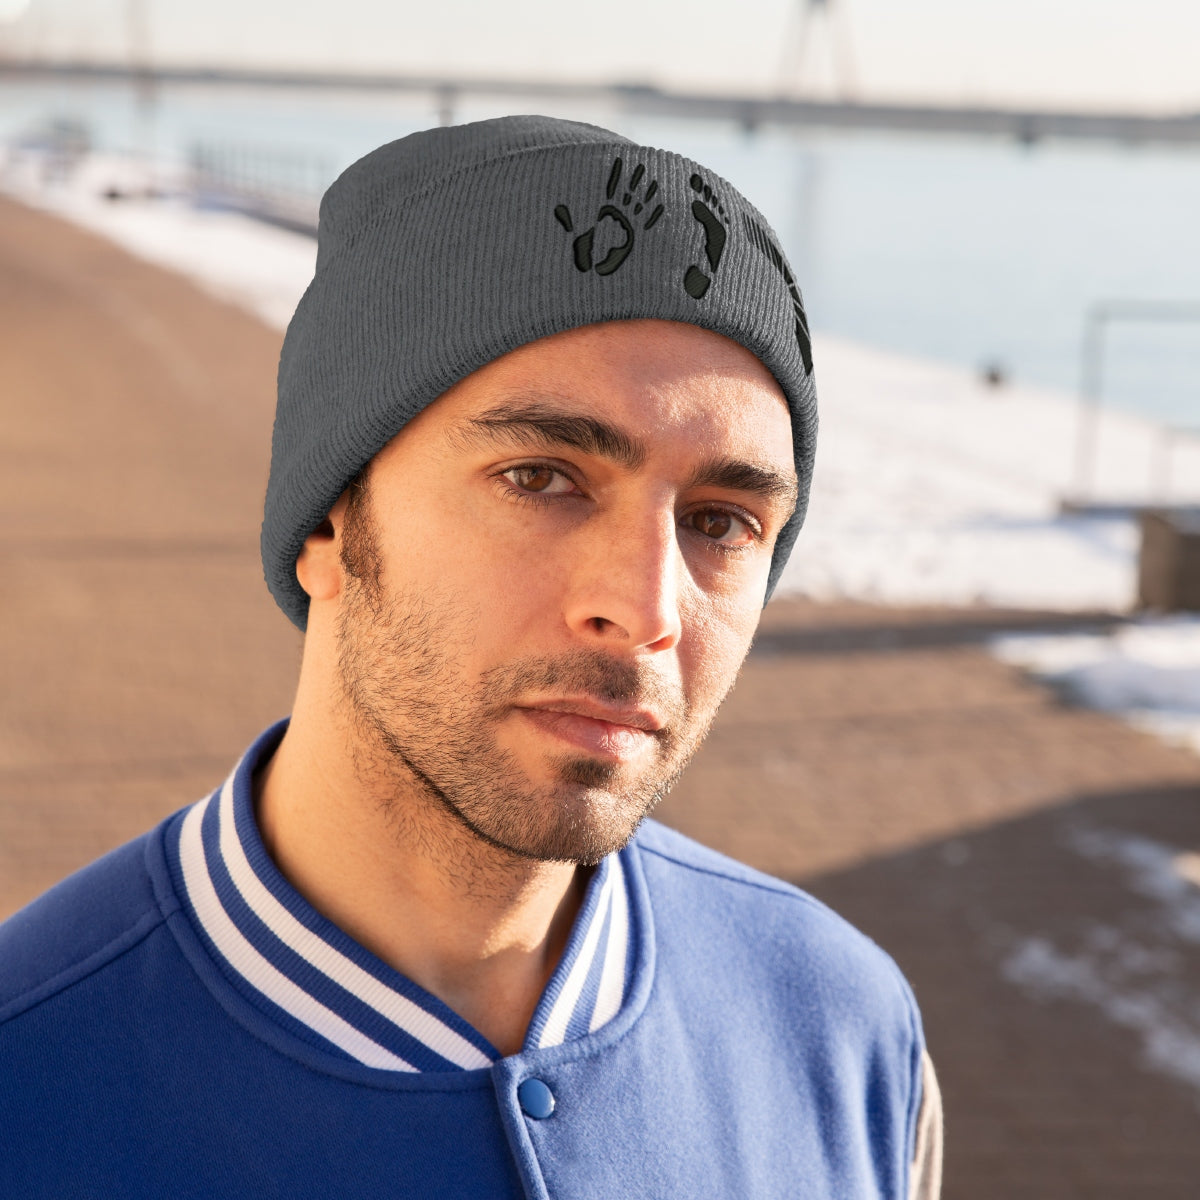 Five Toes Down Knit Beanie Embroidered